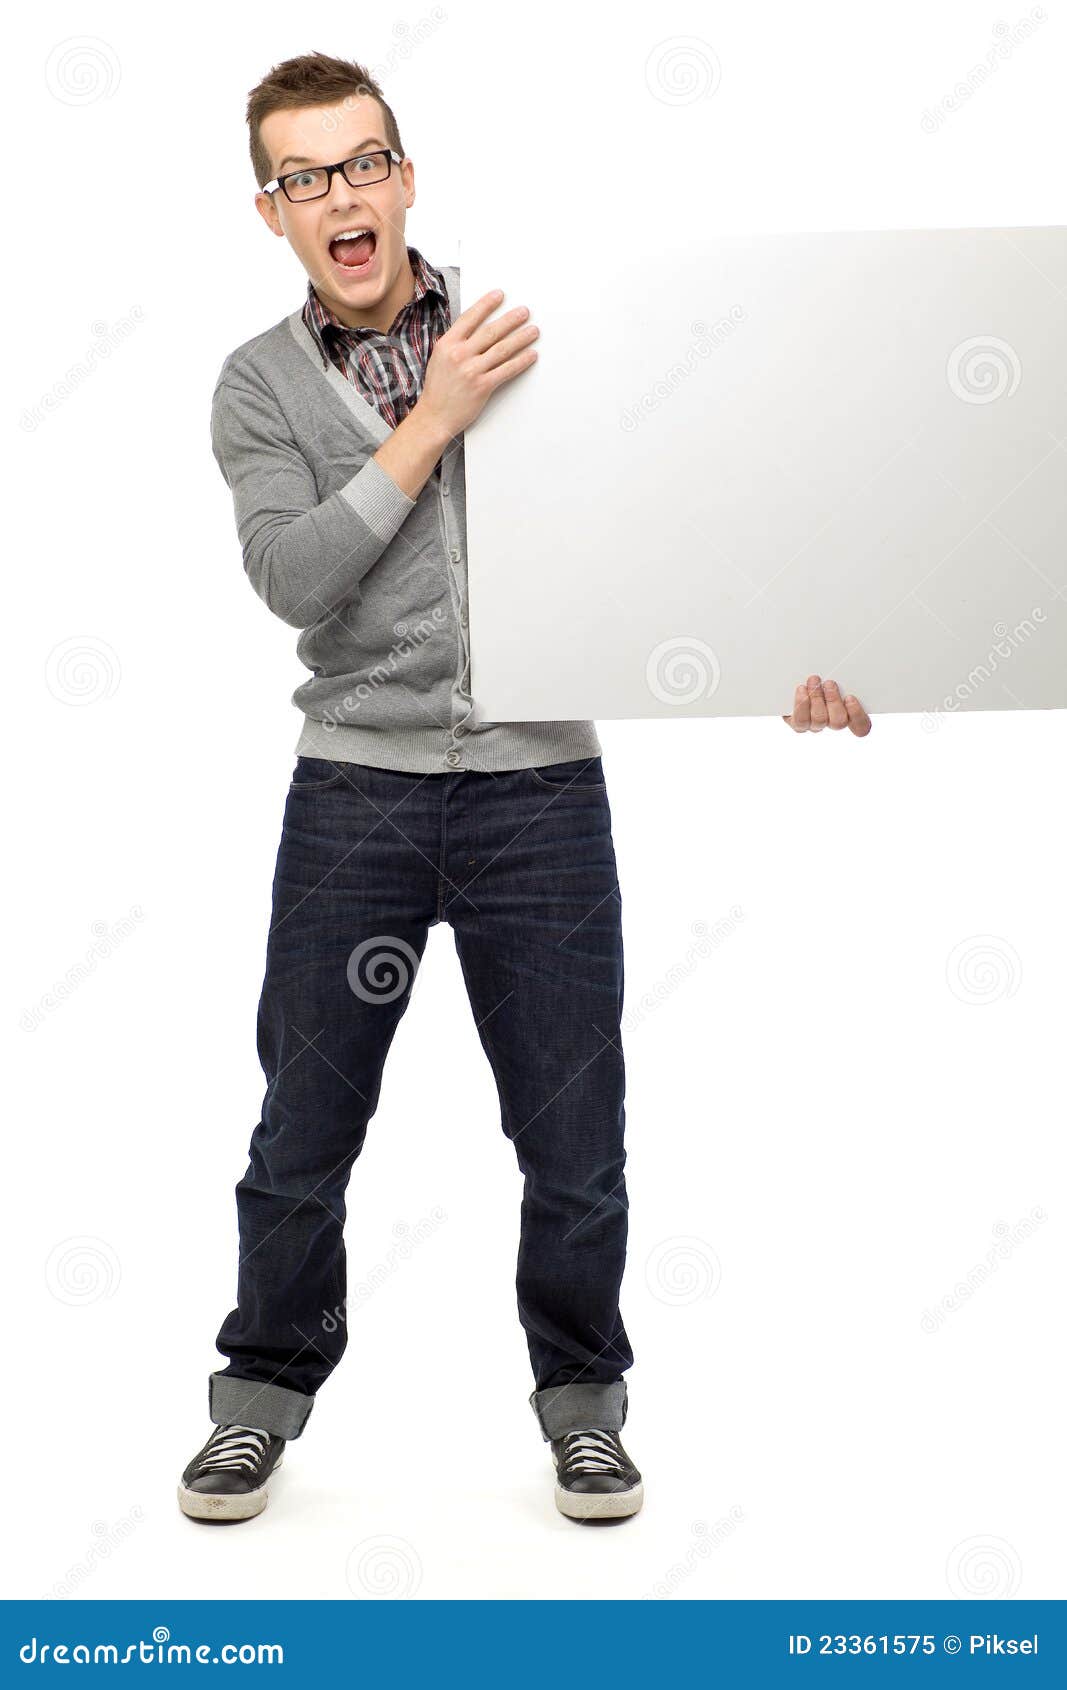 Young Man Holding Blank Placard Stock Image - Image of holding, sign ...